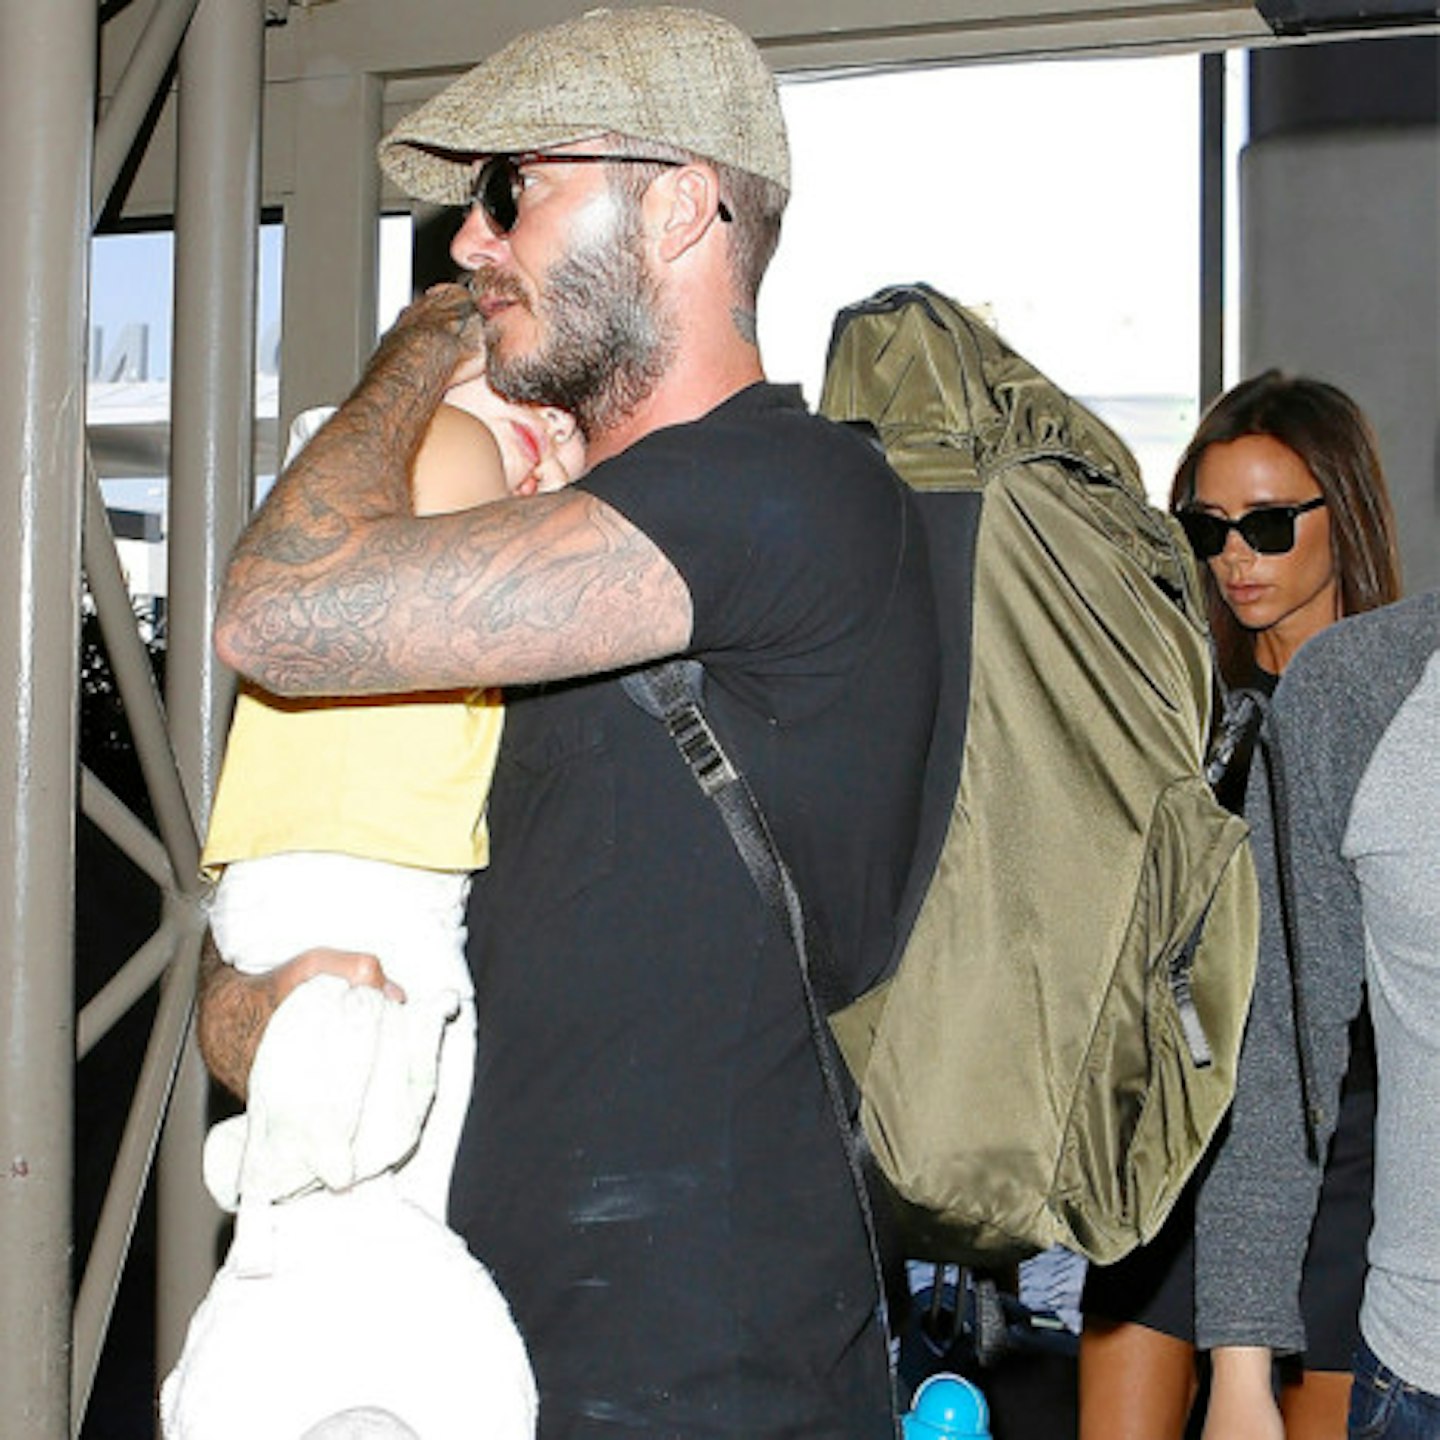 David looked serious as he held his daughter while walking through the airport